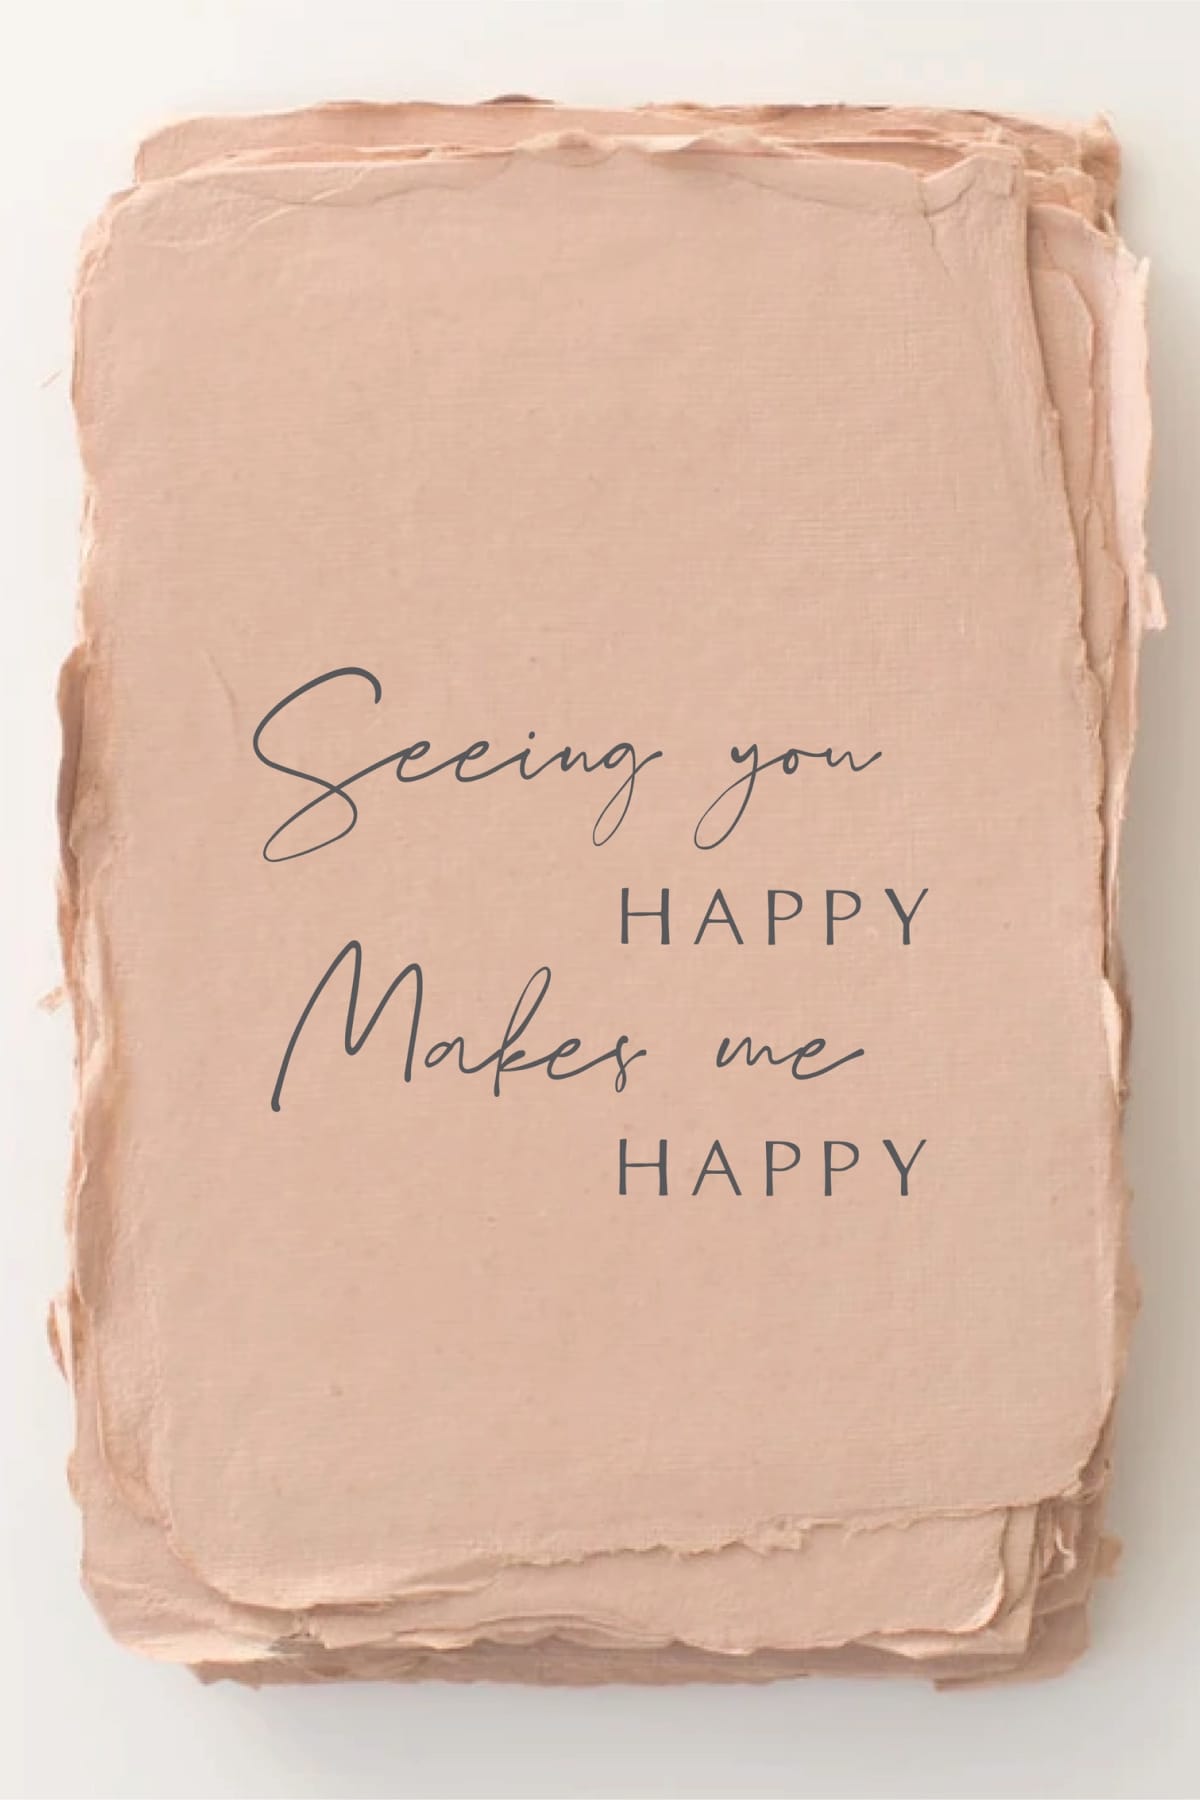 "Seeing you happy makes me happy" Friend Greeting Card - Greeting & Note Cards